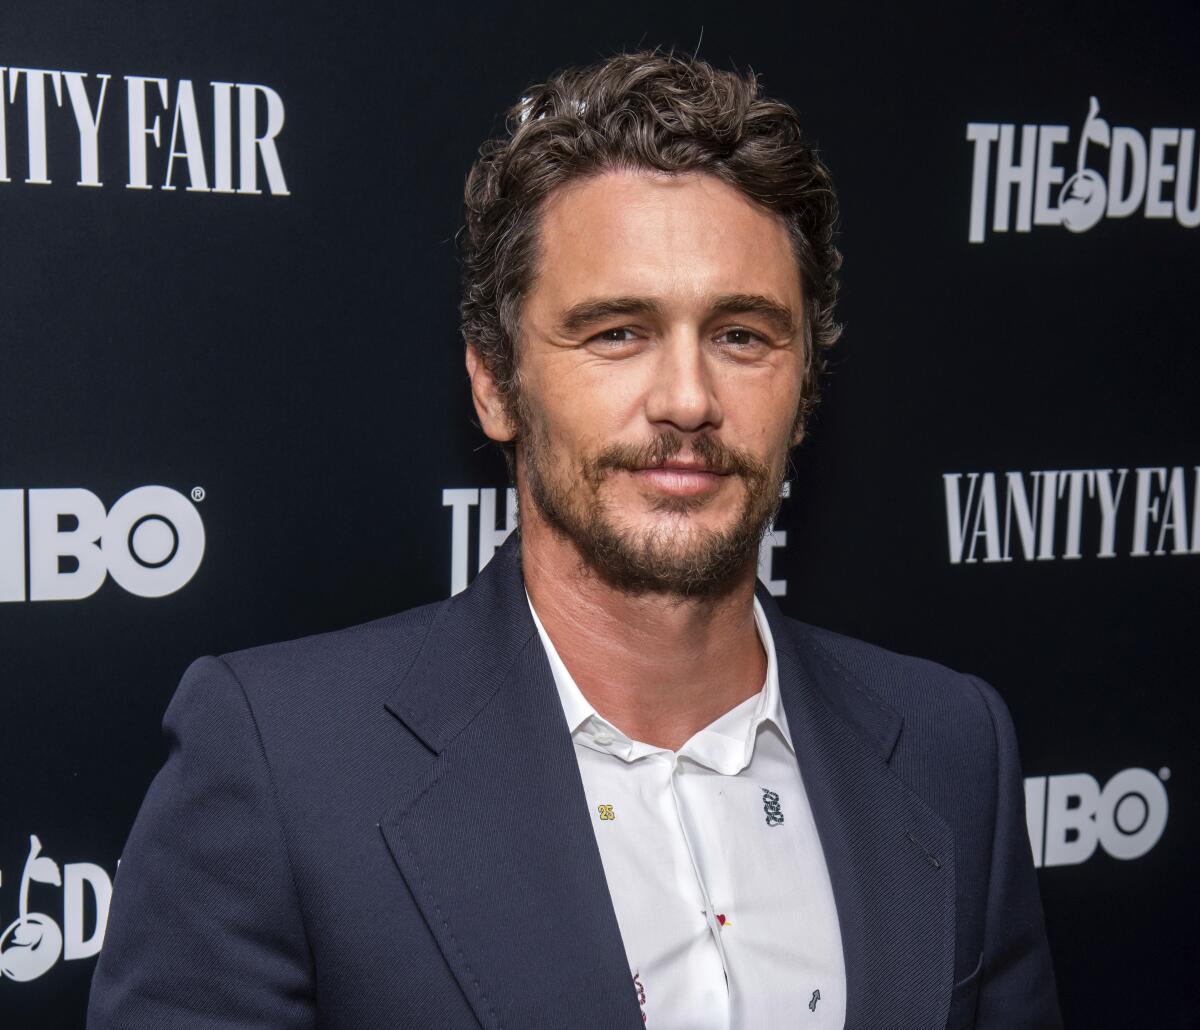 James Franco at the premiere of the final season of HBO's "The Deuce."